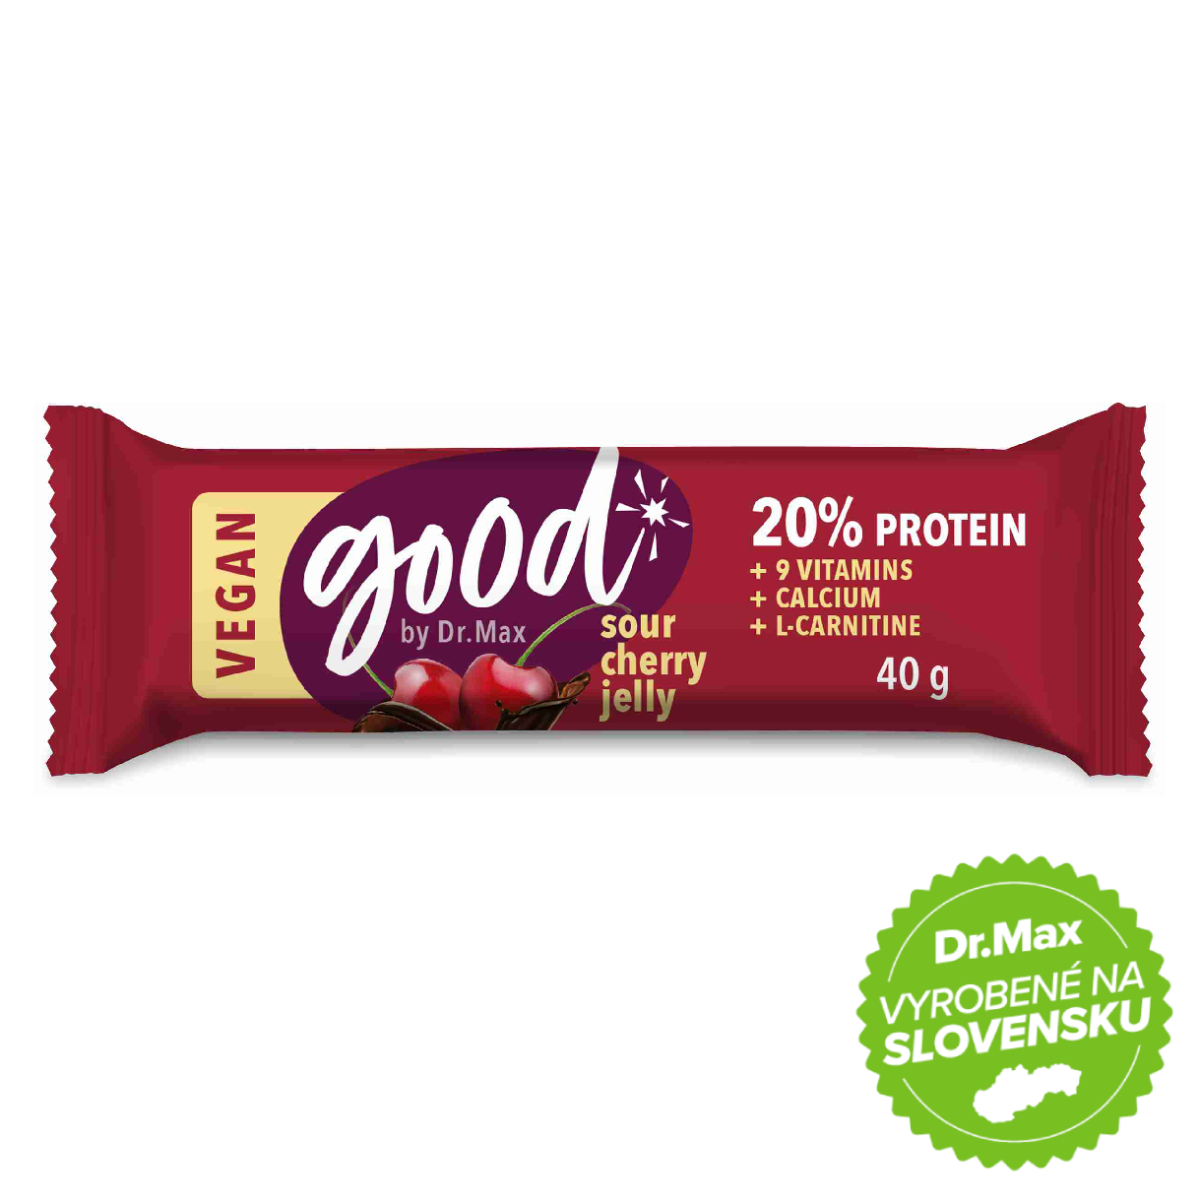 Good by Dr. Max Protein Bar 20 percent Sour Cherry Jelly 40 g